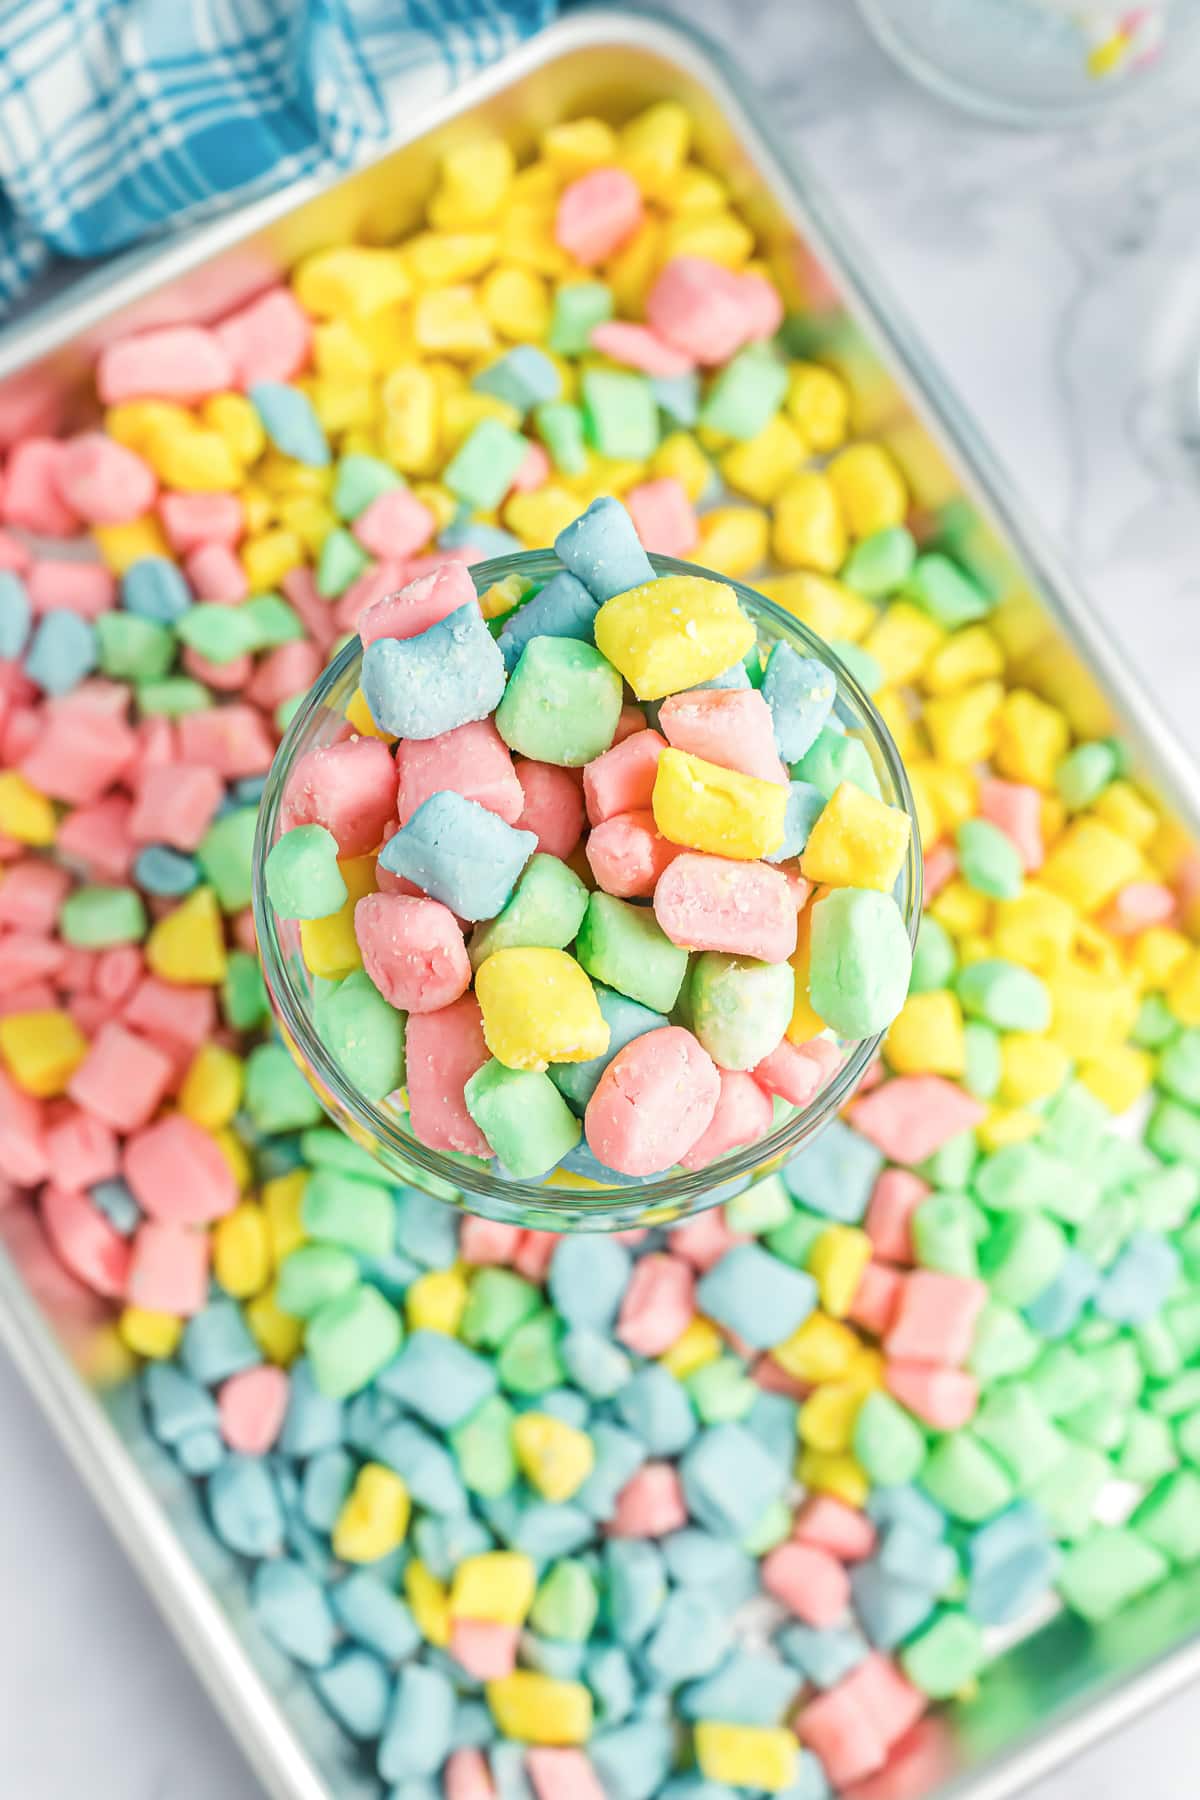 A close up of a cup and tray filled with different colored butter mints.